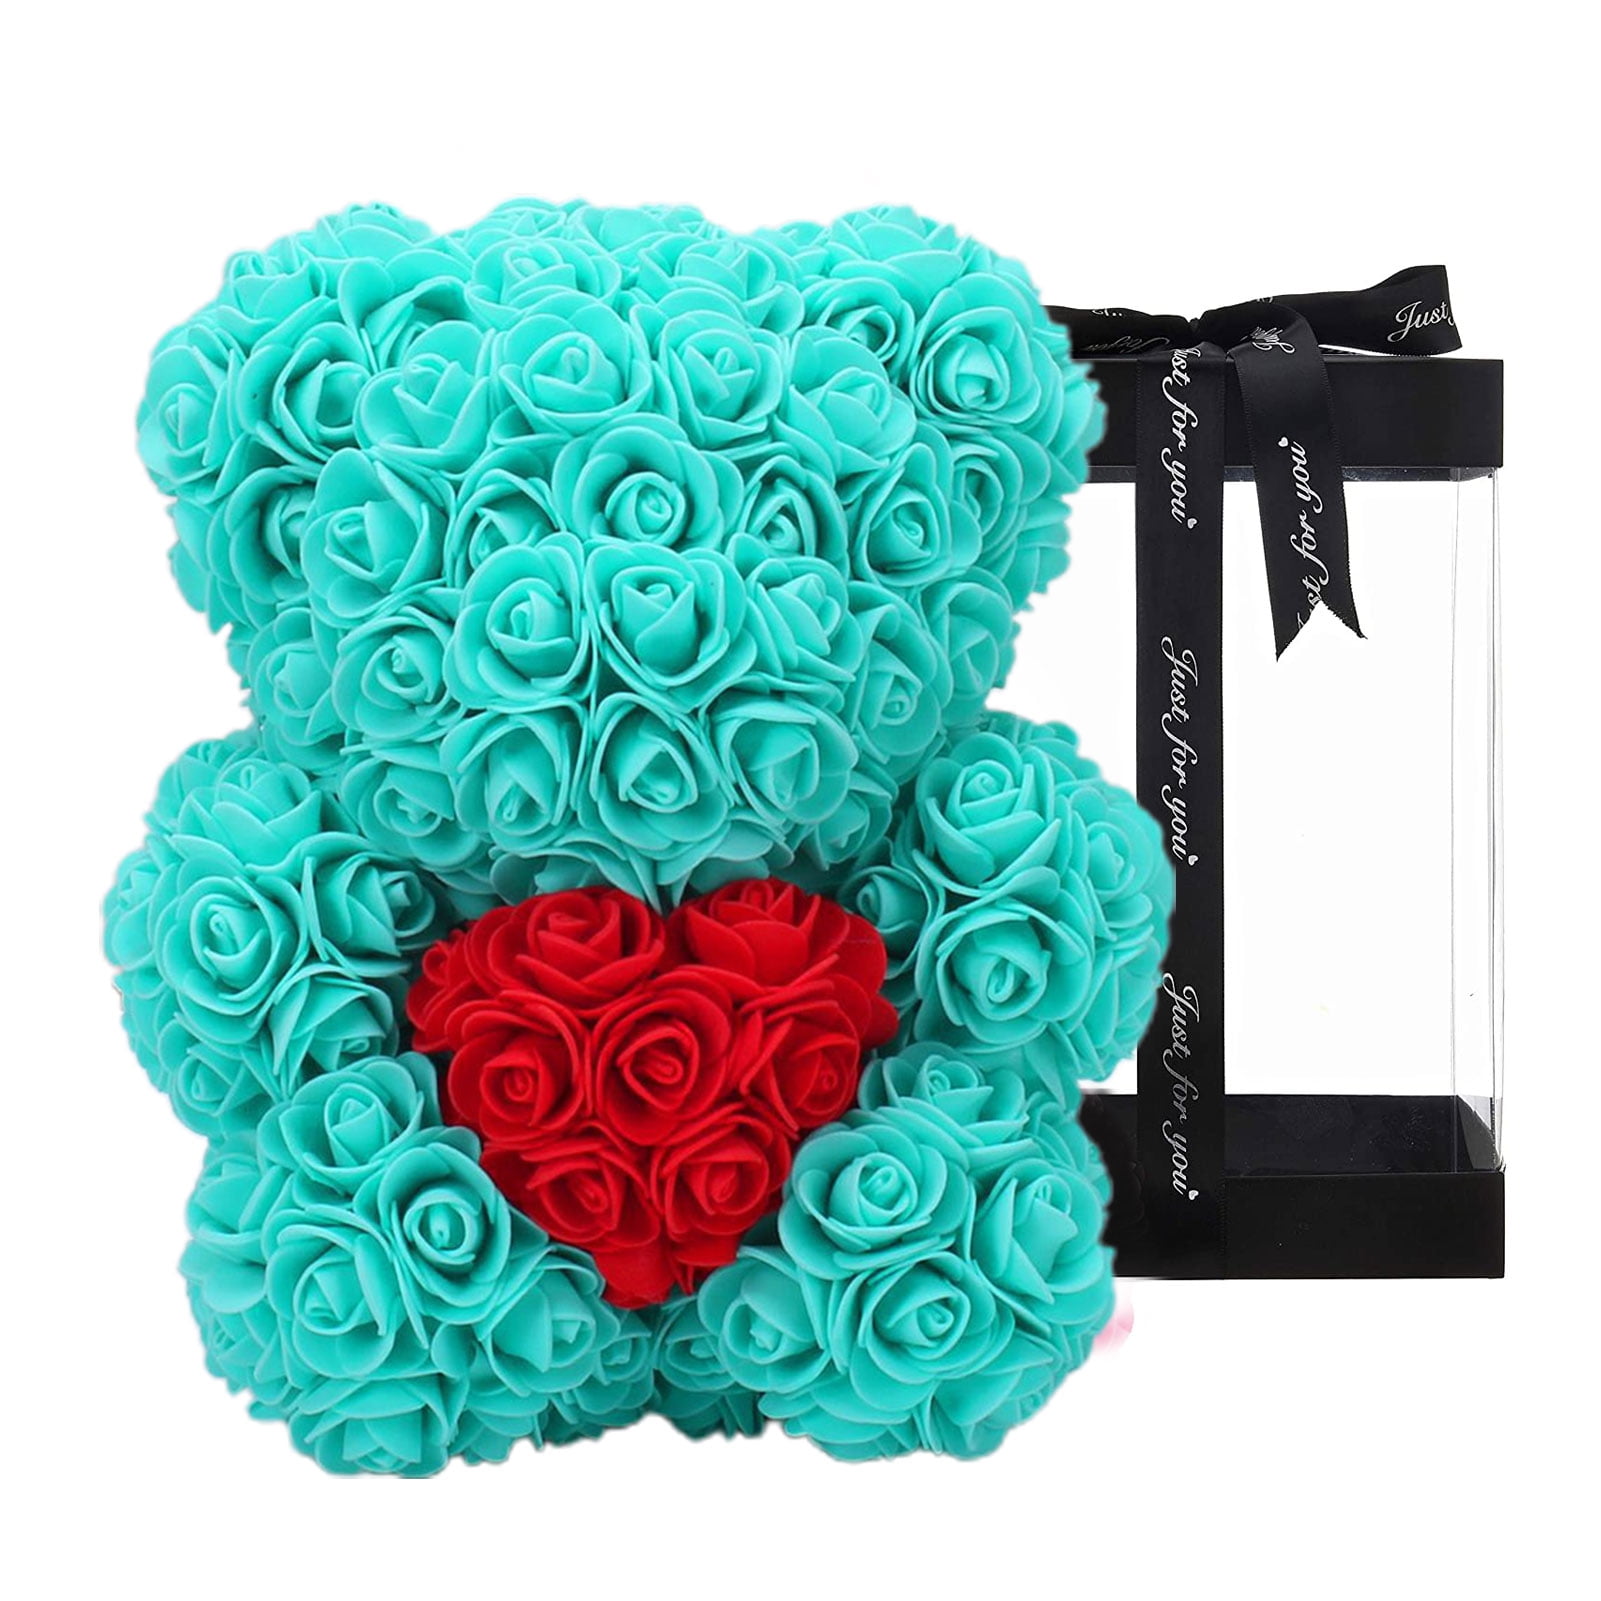 Details about   Enchanted Eternal Rose Flower In Glass LED Light Christmas Valentine's Gift US 